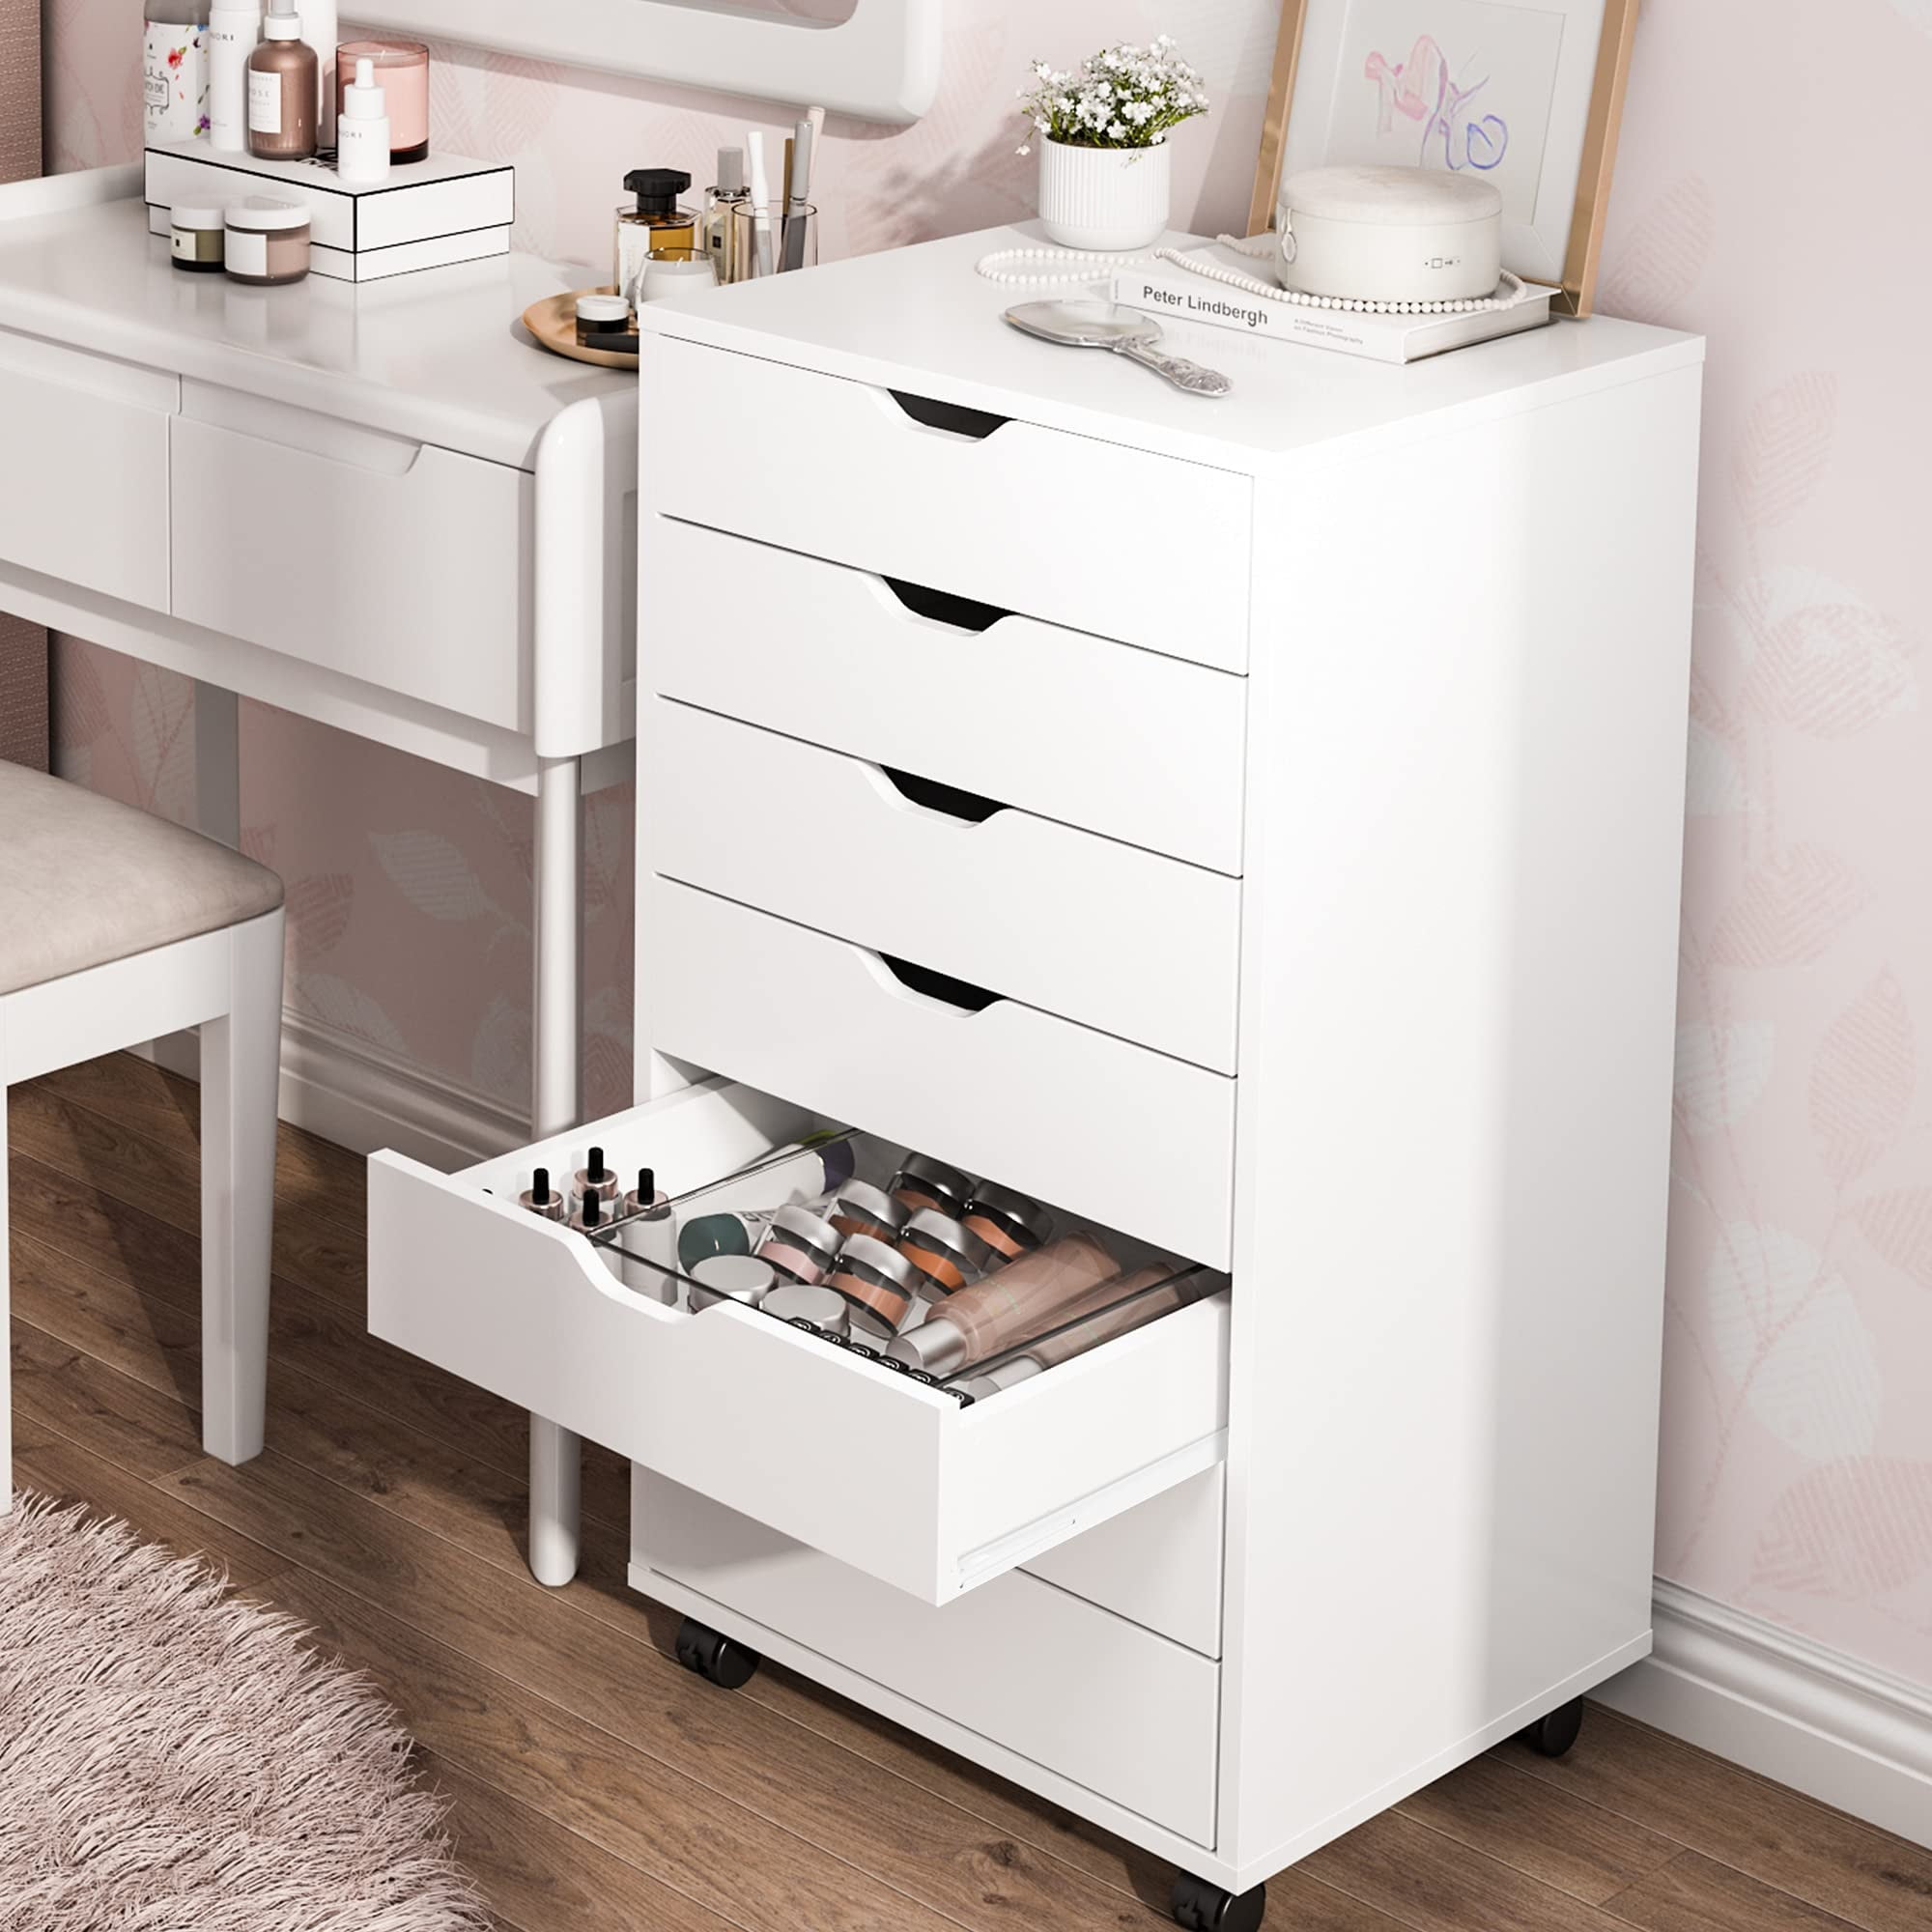 Details about   Bedroom Rolling Filing Cabinet File Storage Organizer Home Office w/Lock+Drawer 